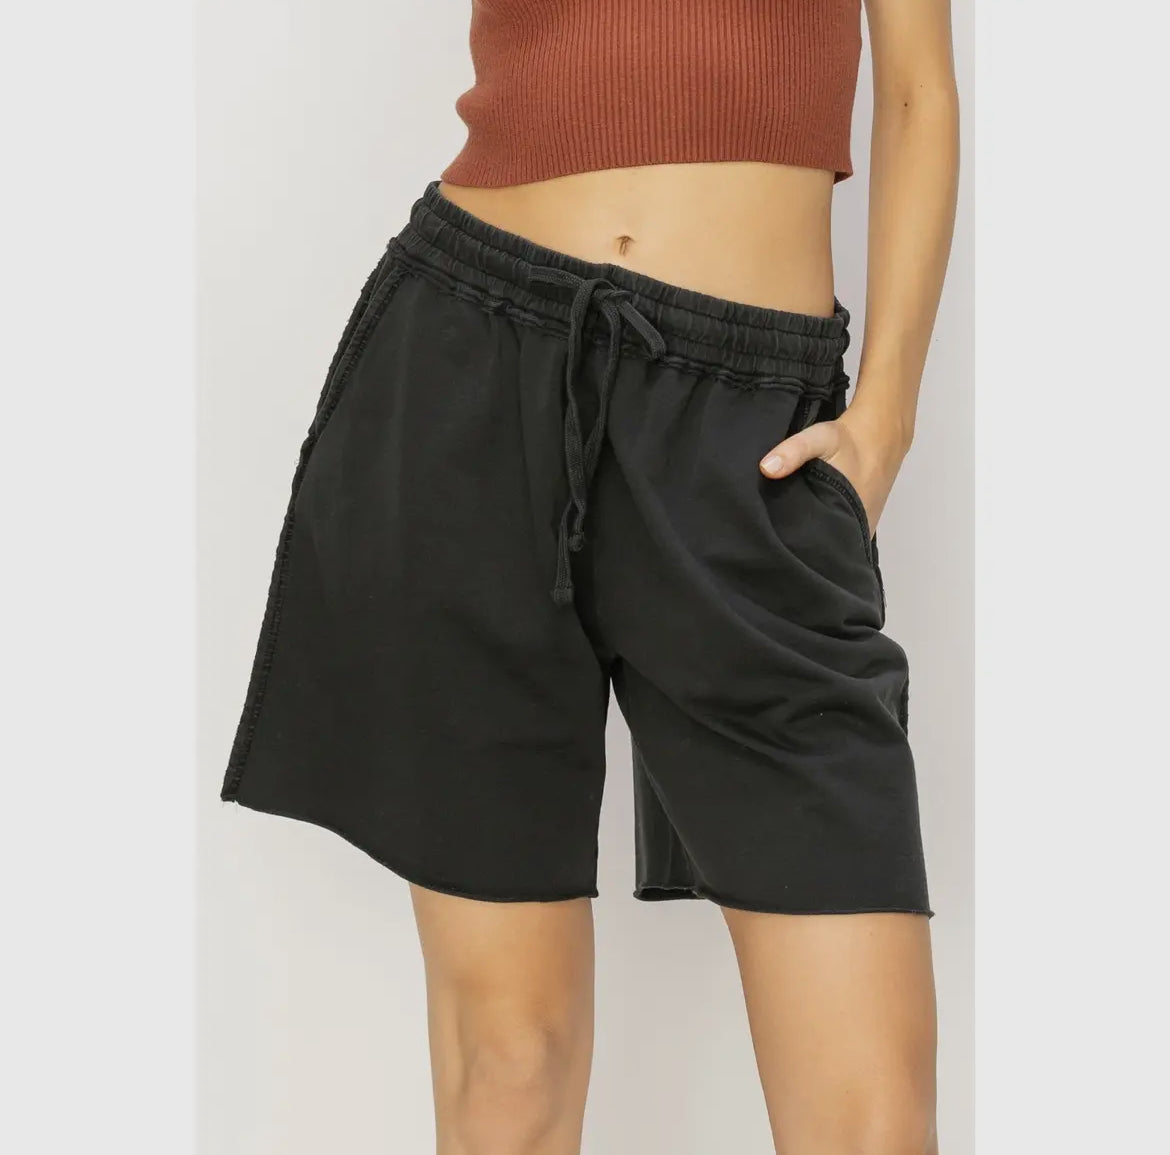 Casual Relaxation Knee Shorts Black